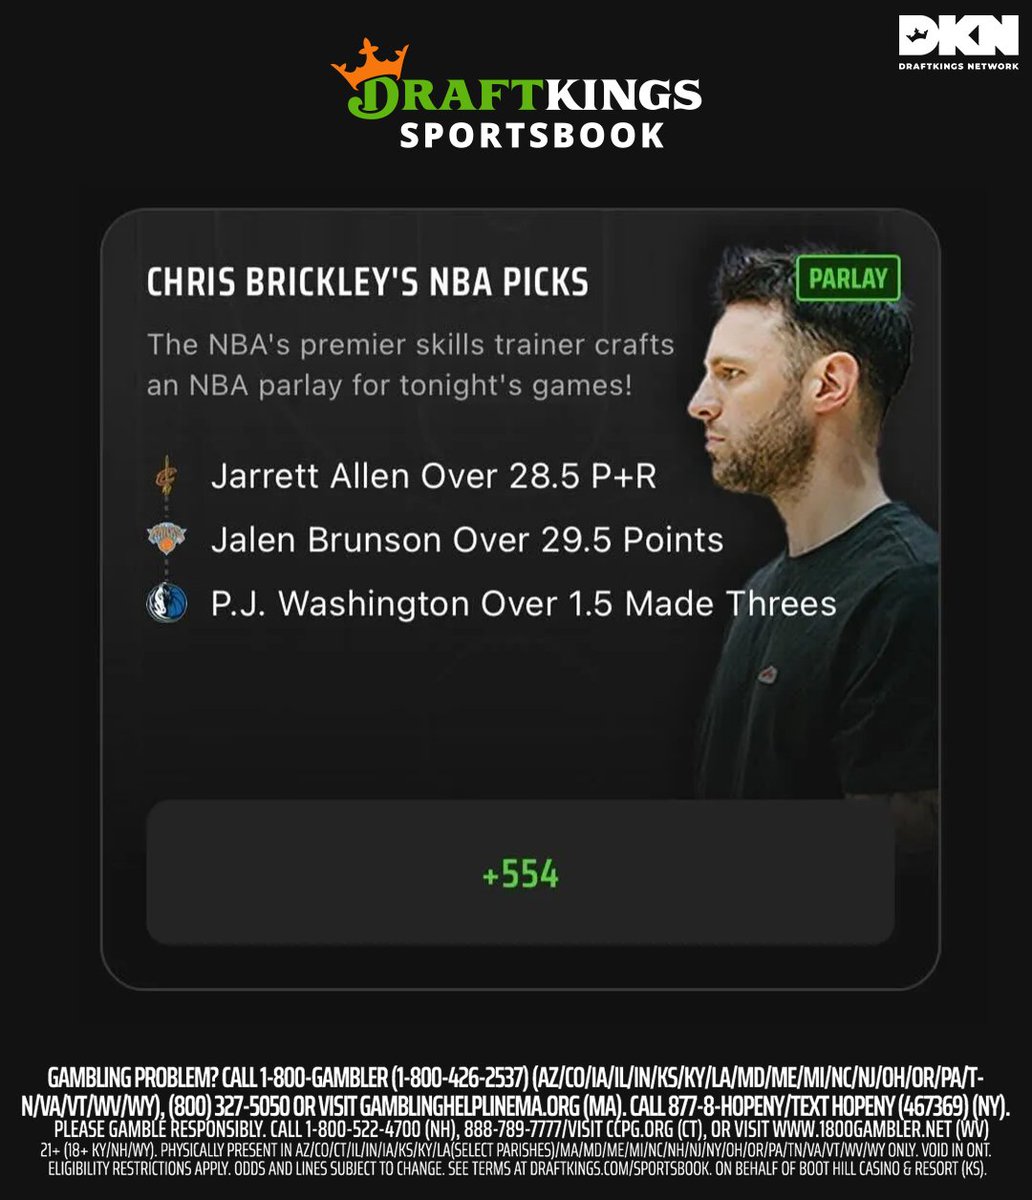 NBA PARLAY: @Cbrickley603 gives his top bet on @DKSportsbook for today’s NBA betting card👇 🏀Jarrett Allen Over 28.5 Points + Rebounds 🏀Jalen Brunson Over 29.5 Points 🏀P.J. Washington Over 1.5 Made Threes Odds: +554